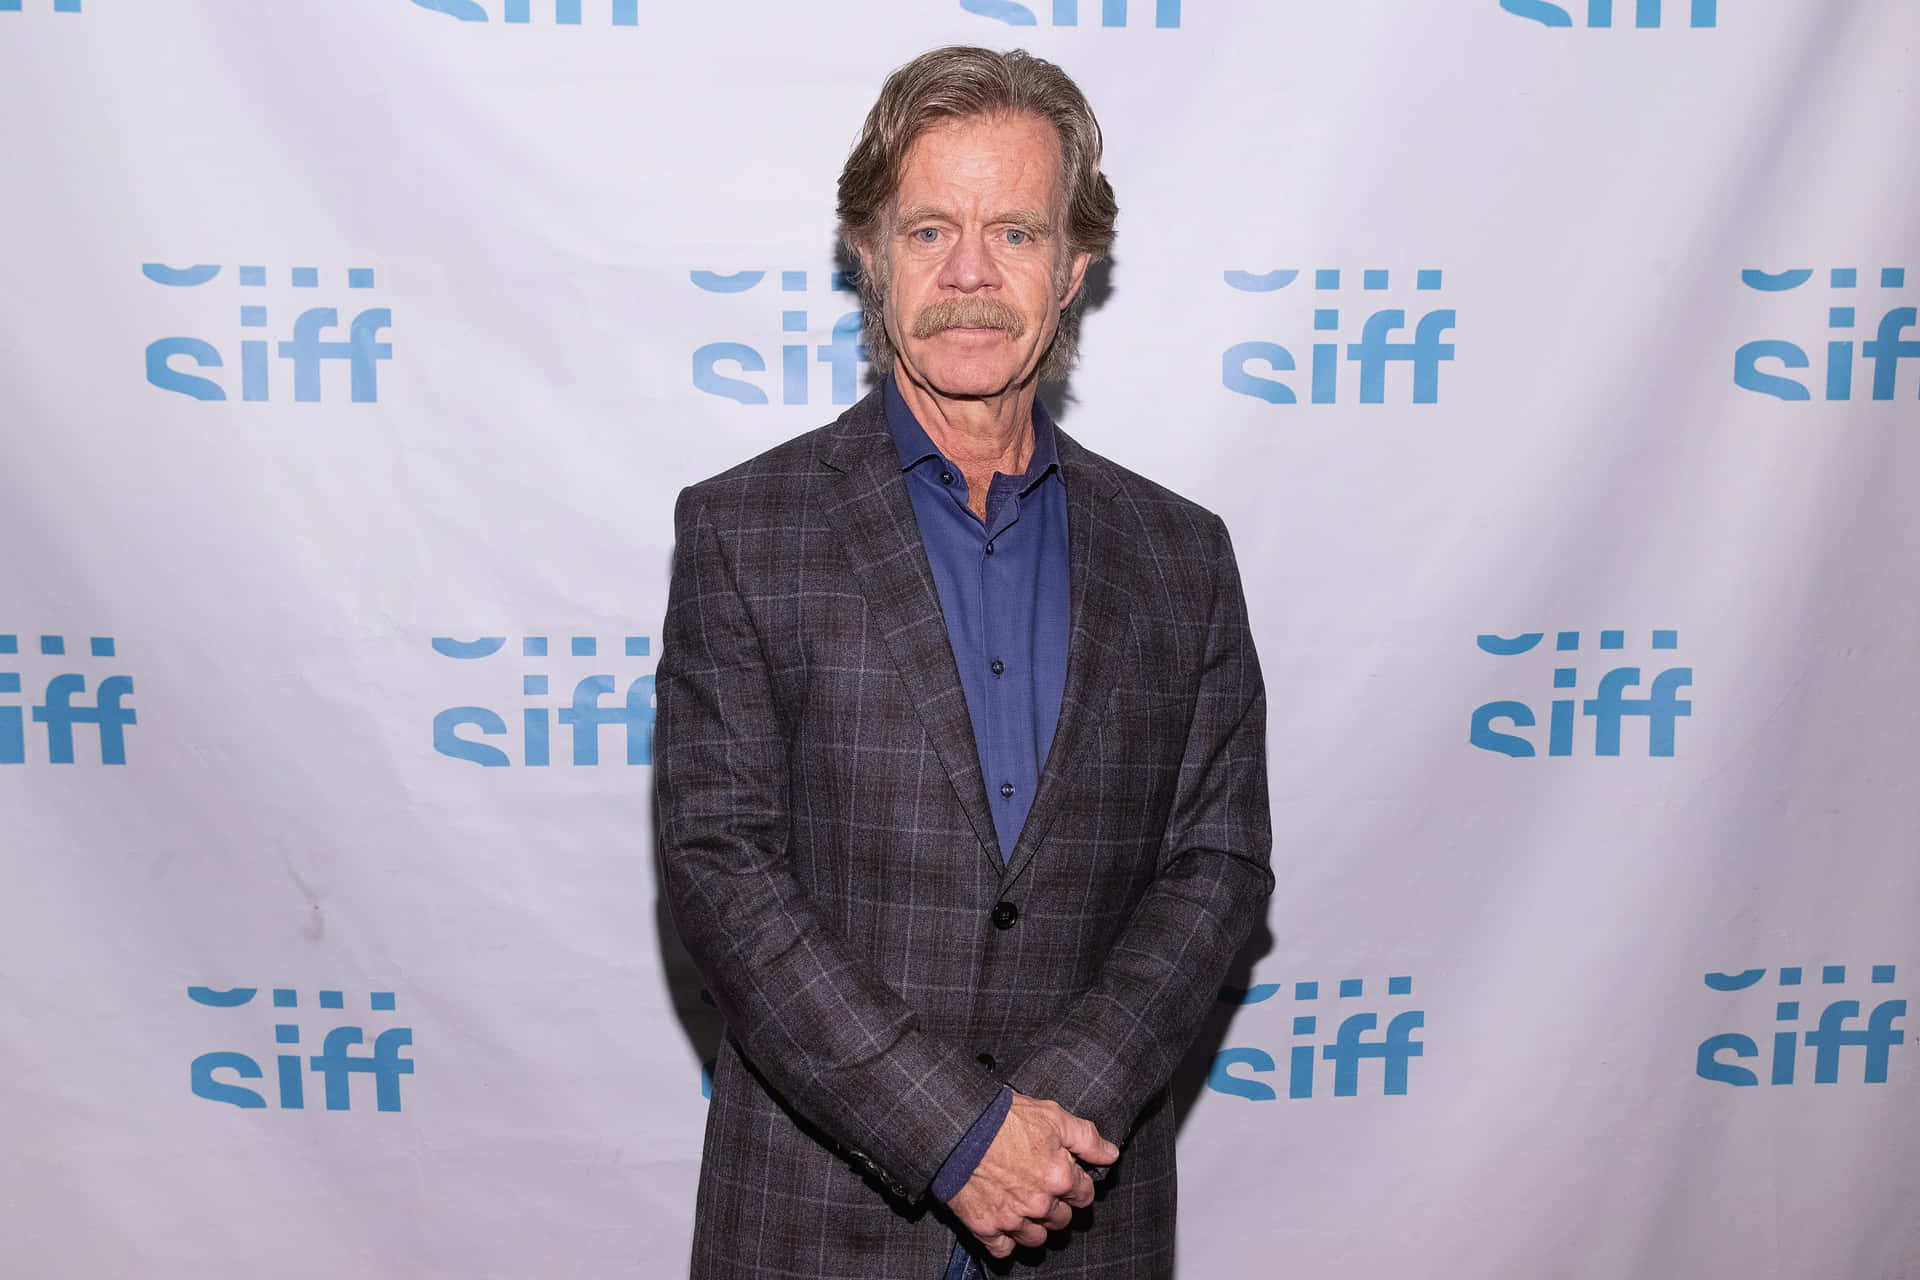 William H. Macy: Talented Actor In A Thoughtful Pose